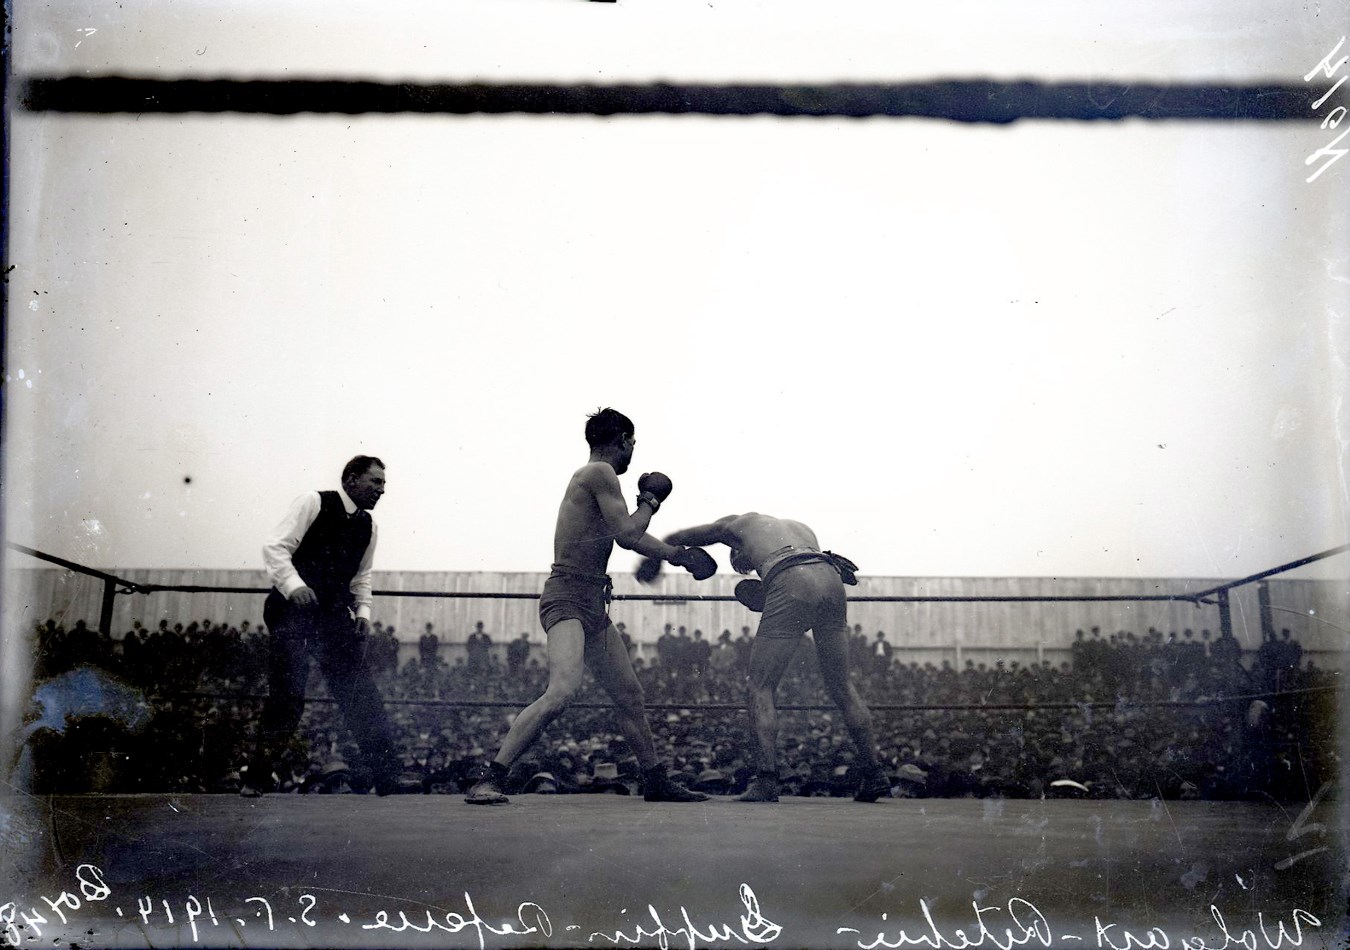 Dana Collection Of Important Boxing Negatives - 1914 Wolgast vs. Ritchie "Battling in the Ring" Type I Glass Plate Negative by Dana Studios